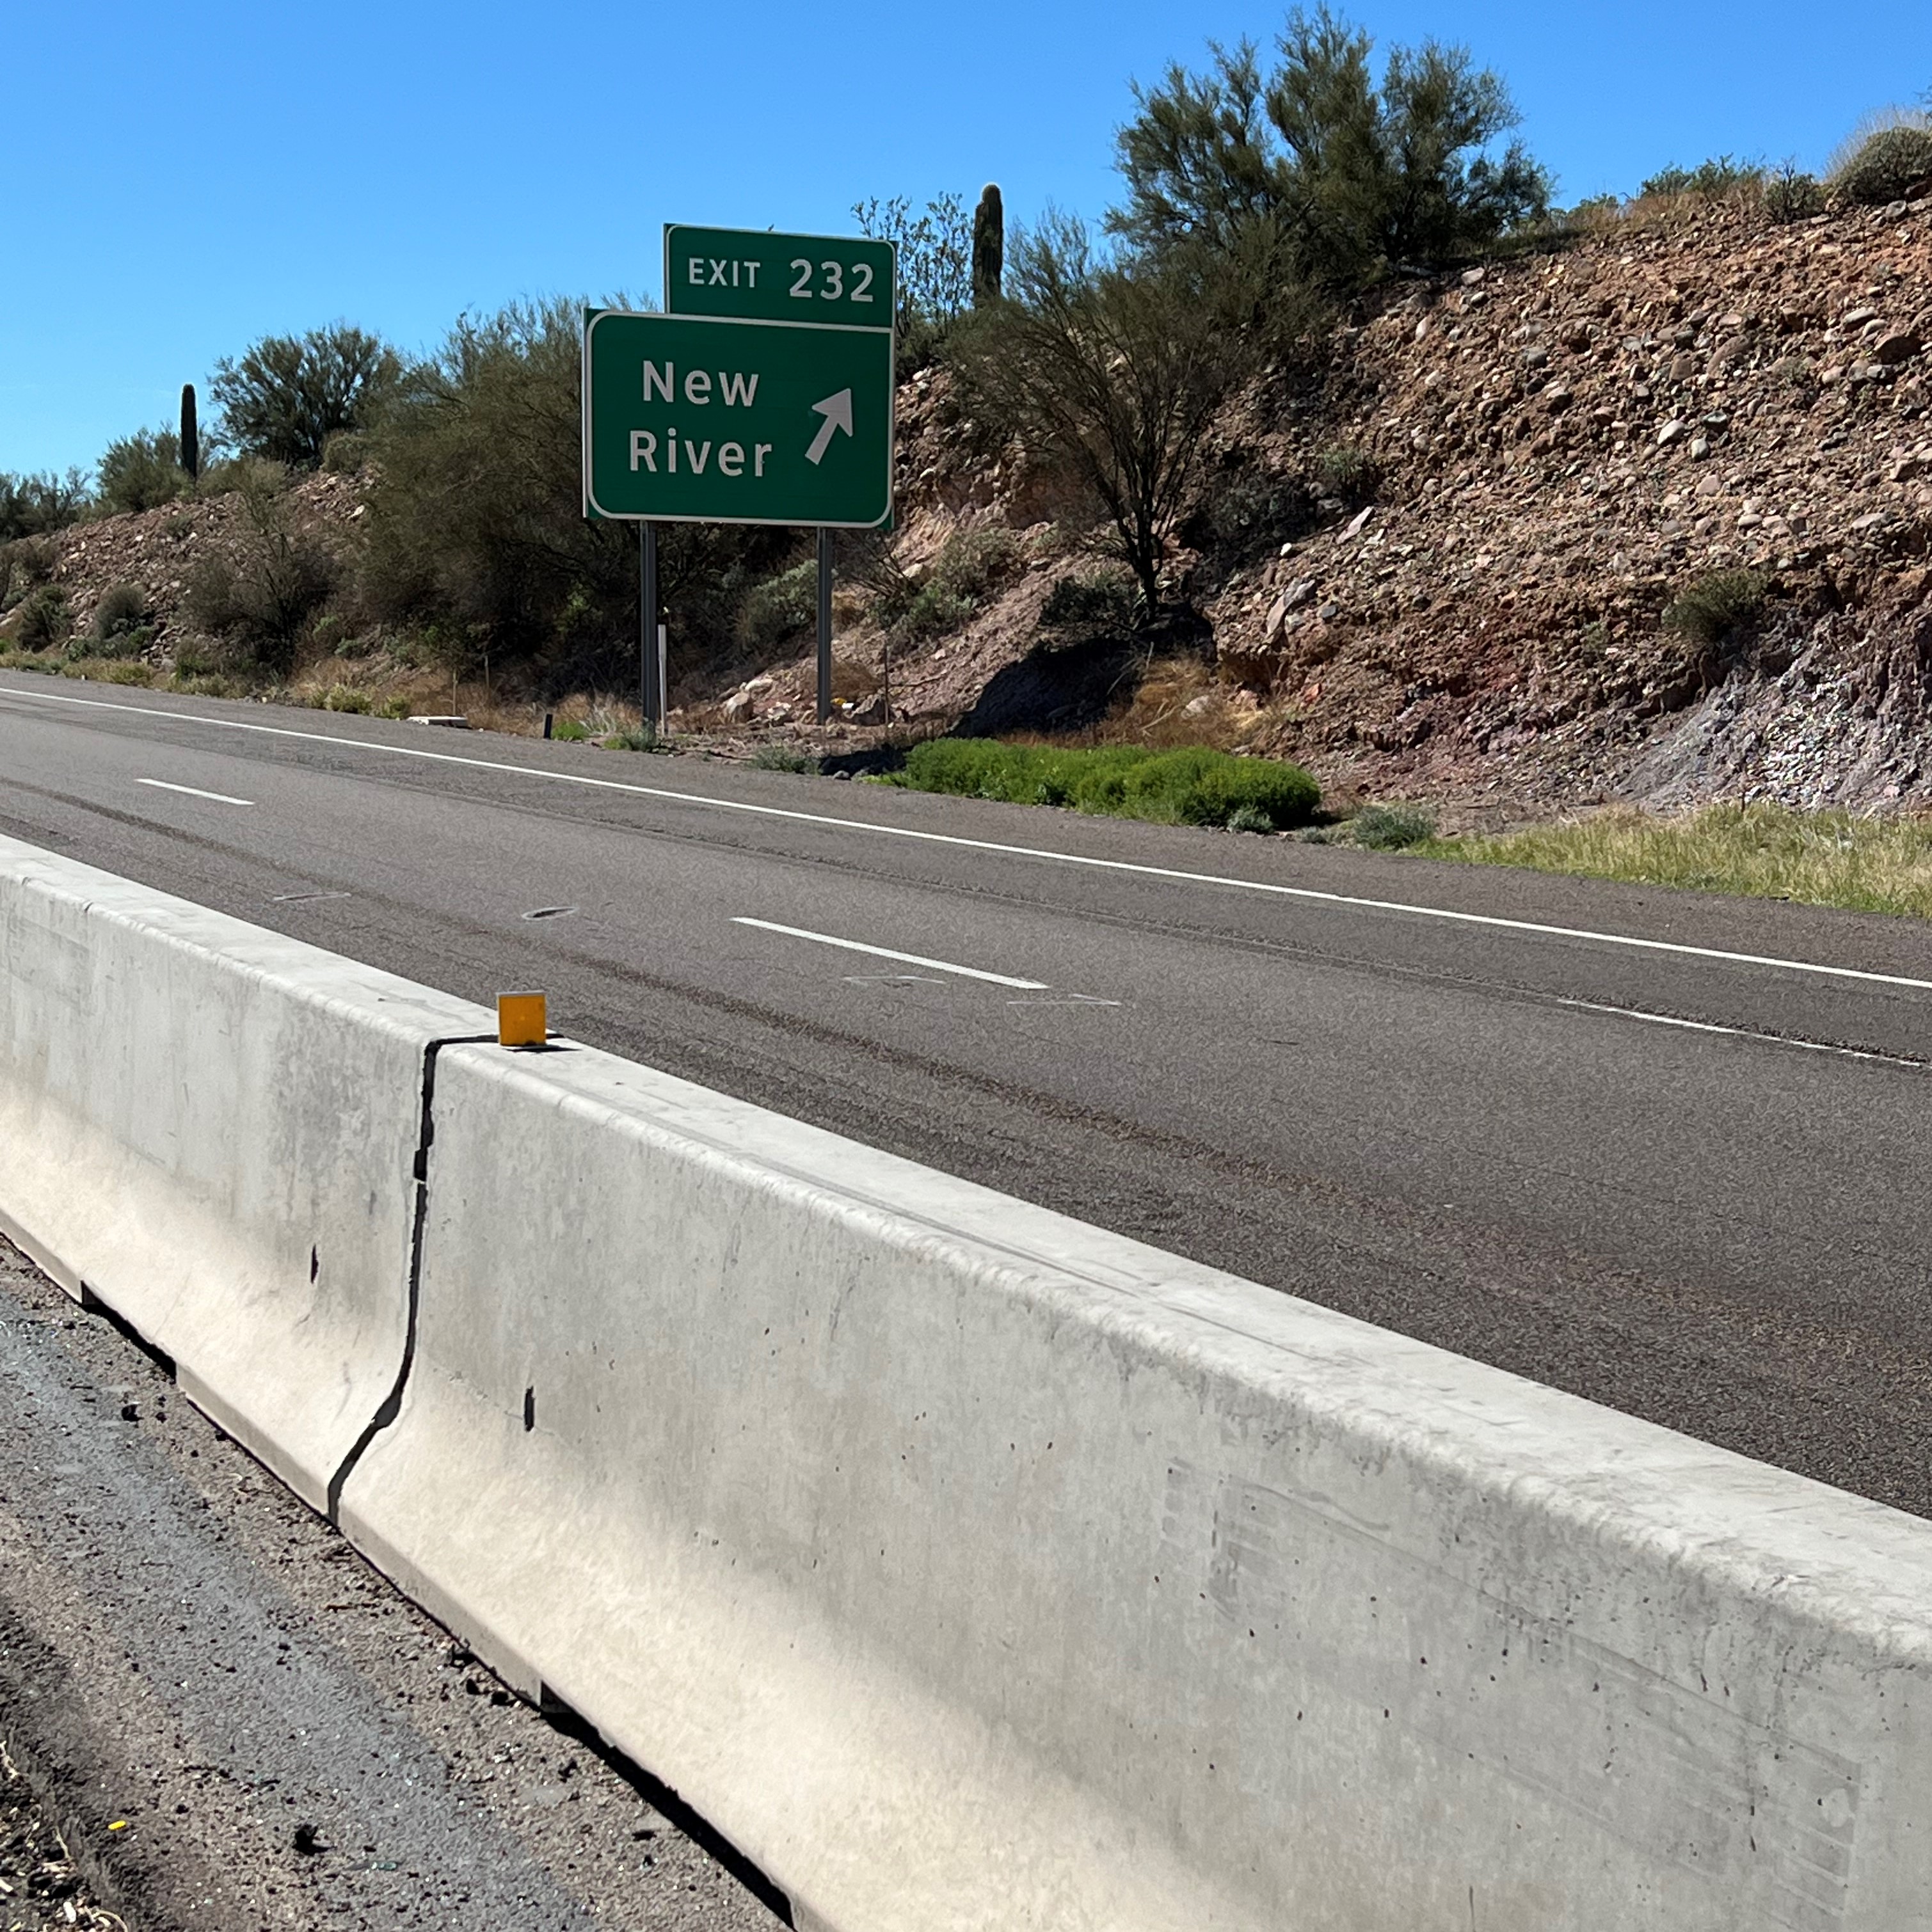 Interstate 17 near the New River exit. A paved roadway with a barrier in the foreground. On the other side of the barrier are where the new flex lanes are being constructed.